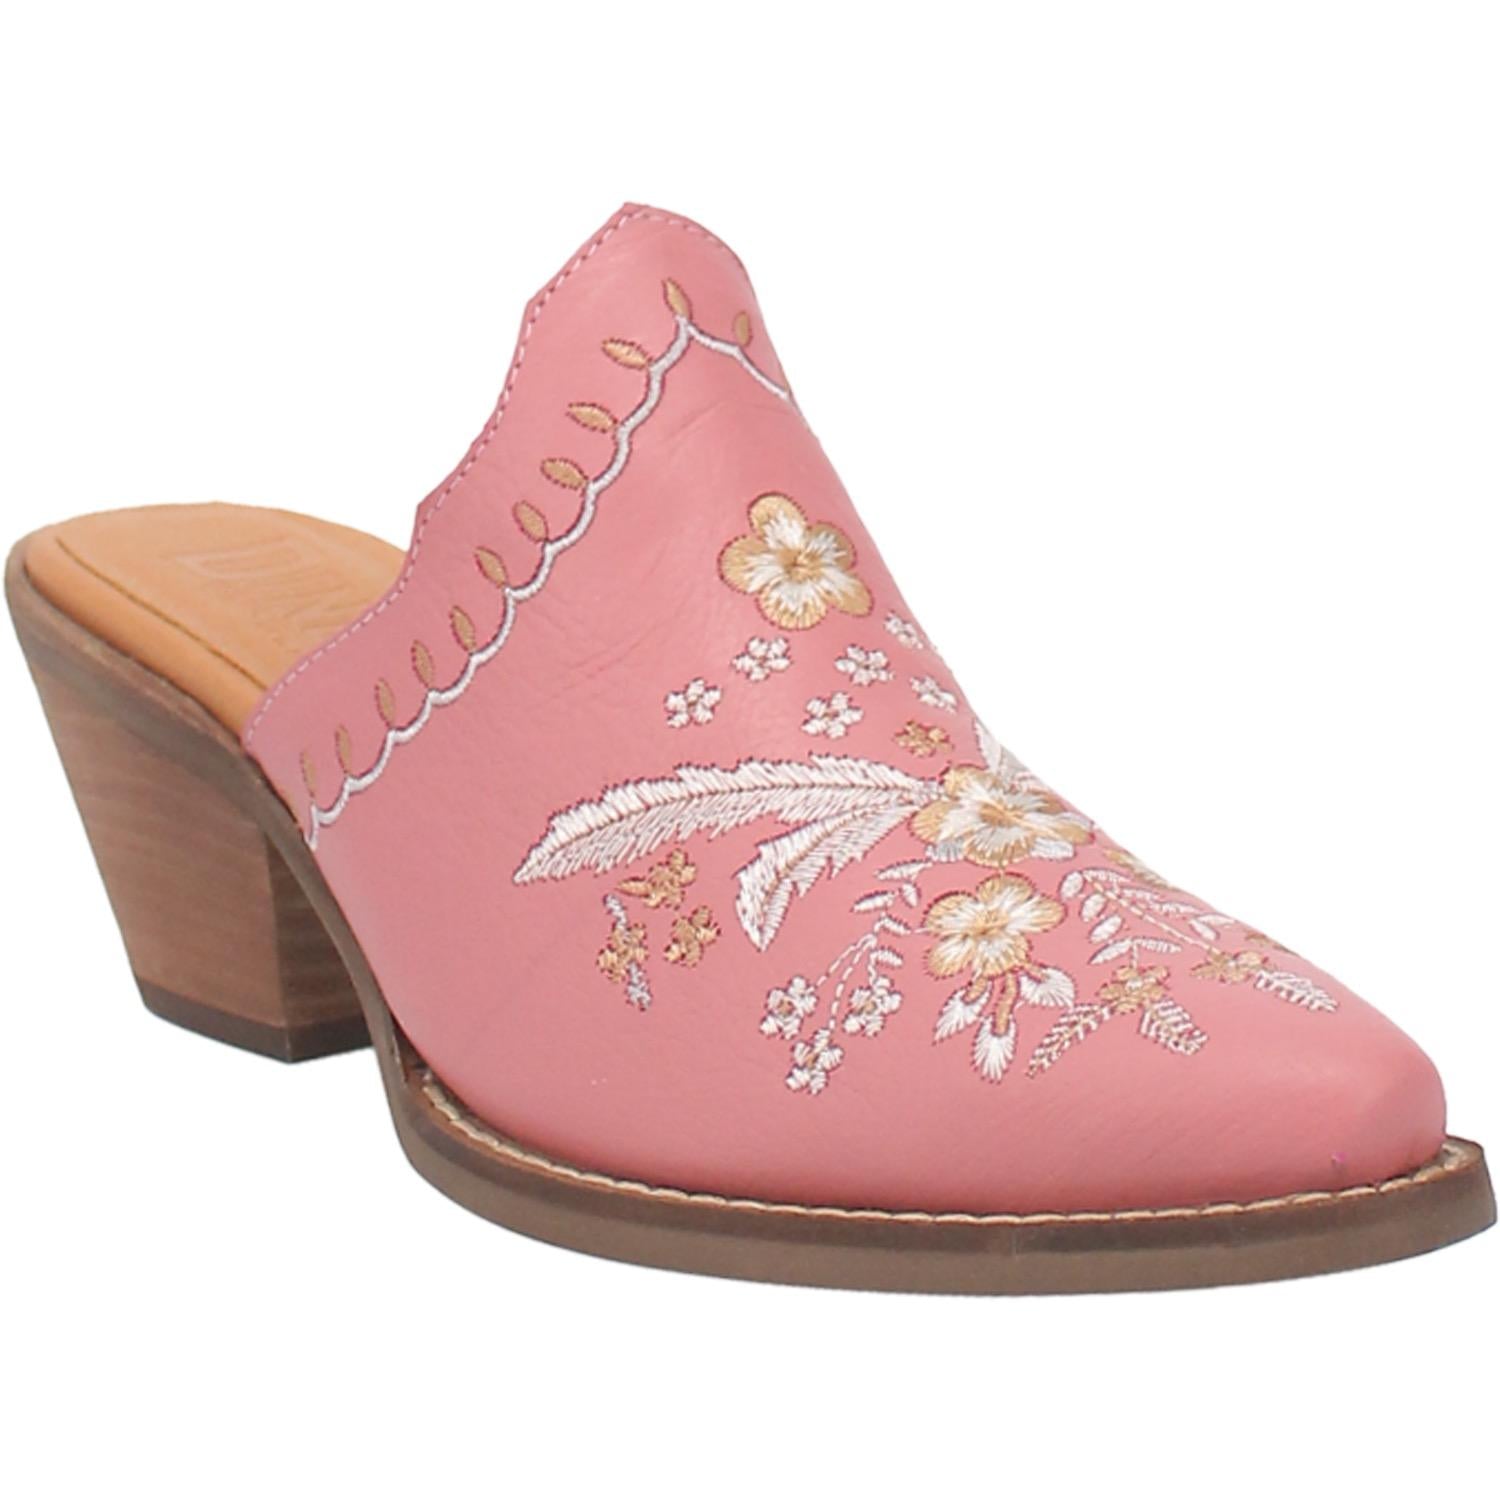 A pink bootie with a white and cream floral and feather design on the upper, a white and cream stitched design on the edge, and a short heel.